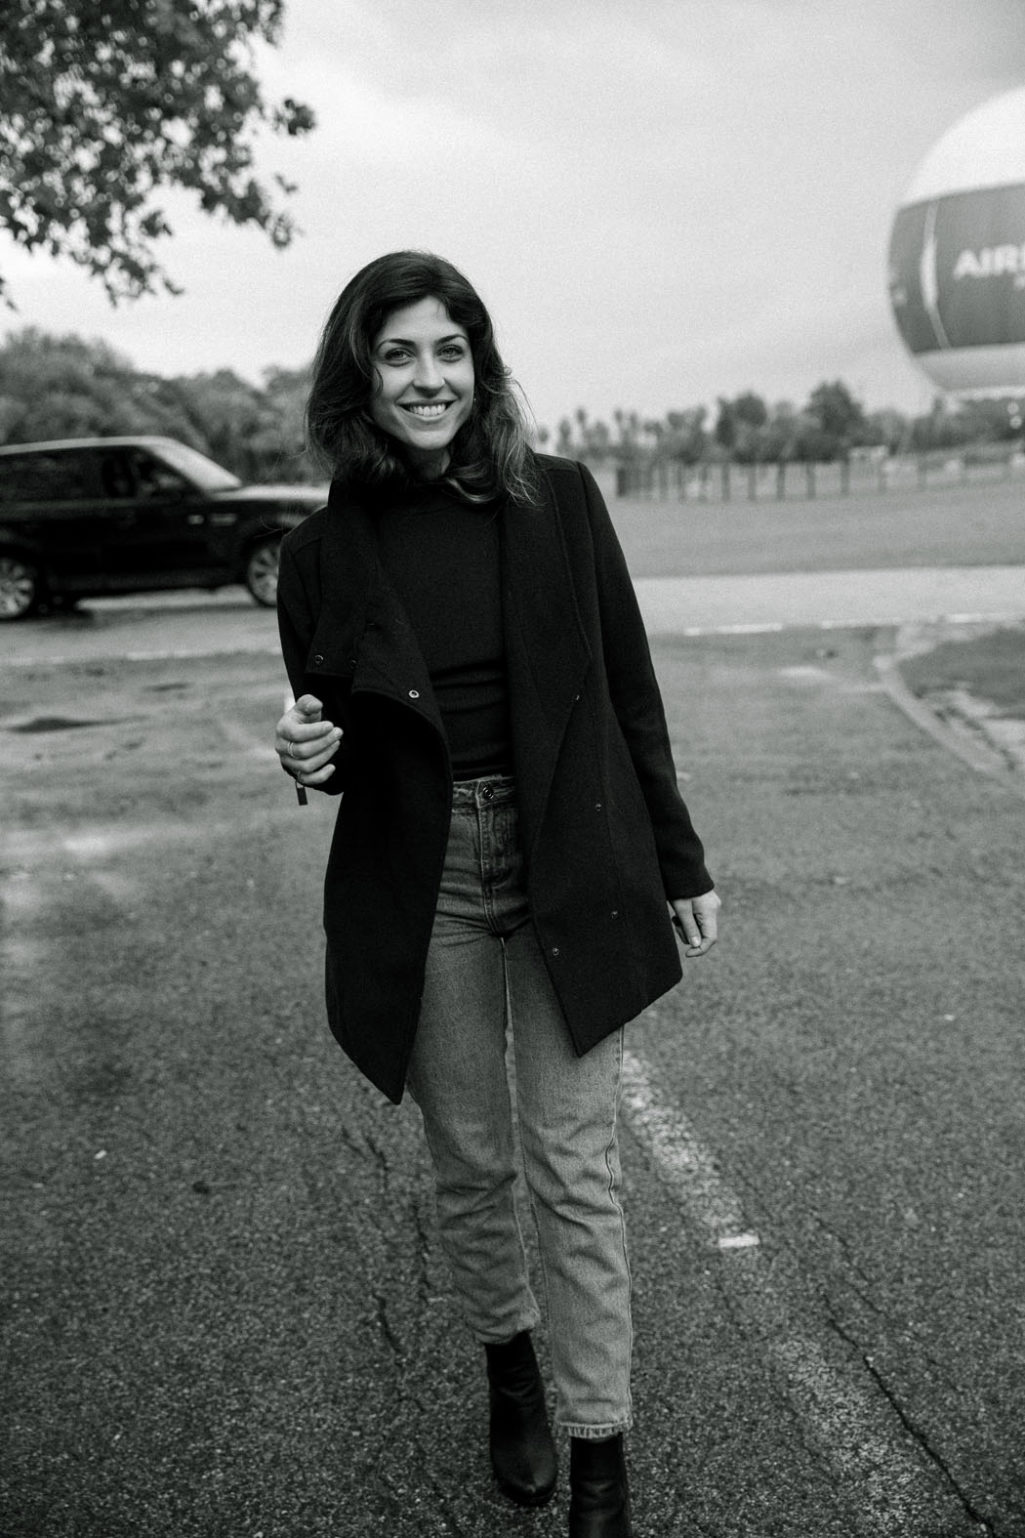 5 minutes with Danit Alaluf on a rainy afternoon - C-Heads Magazine